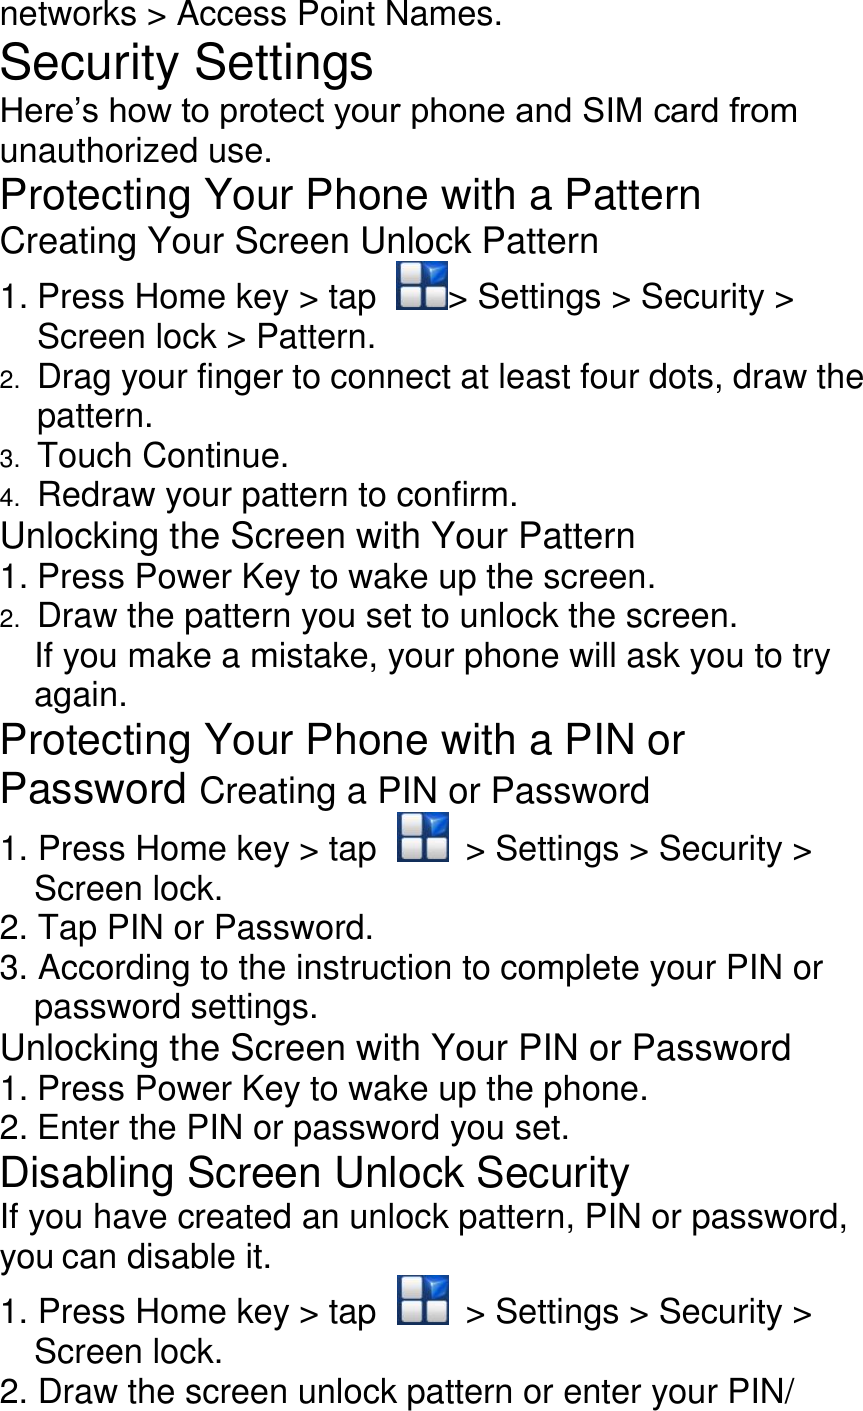 networks &gt; Access Point Names. Security Settings Here’s how to protect your phone and SIM card from unauthorized use. Protecting Your Phone with a Pattern Creating Your Screen Unlock Pattern 1. Press Home key &gt; tap  &gt; Settings &gt; Security &gt; Screen lock &gt; Pattern. 2. Drag your finger to connect at least four dots, draw the pattern. 3. Touch Continue. 4. Redraw your pattern to confirm. Unlocking the Screen with Your Pattern 1. Press Power Key to wake up the screen. 2. Draw the pattern you set to unlock the screen. If you make a mistake, your phone will ask you to try again. Protecting Your Phone with a PIN or Password Creating a PIN or Password 1. Press Home key &gt; tap    &gt; Settings &gt; Security &gt; Screen lock. 2. Tap PIN or Password. 3. According to the instruction to complete your PIN or password settings. Unlocking the Screen with Your PIN or Password 1. Press Power Key to wake up the phone. 2. Enter the PIN or password you set. Disabling Screen Unlock Security If you have created an unlock pattern, PIN or password, you can disable it. 1. Press Home key &gt; tap    &gt; Settings &gt; Security &gt; Screen lock. 2. Draw the screen unlock pattern or enter your PIN/ 